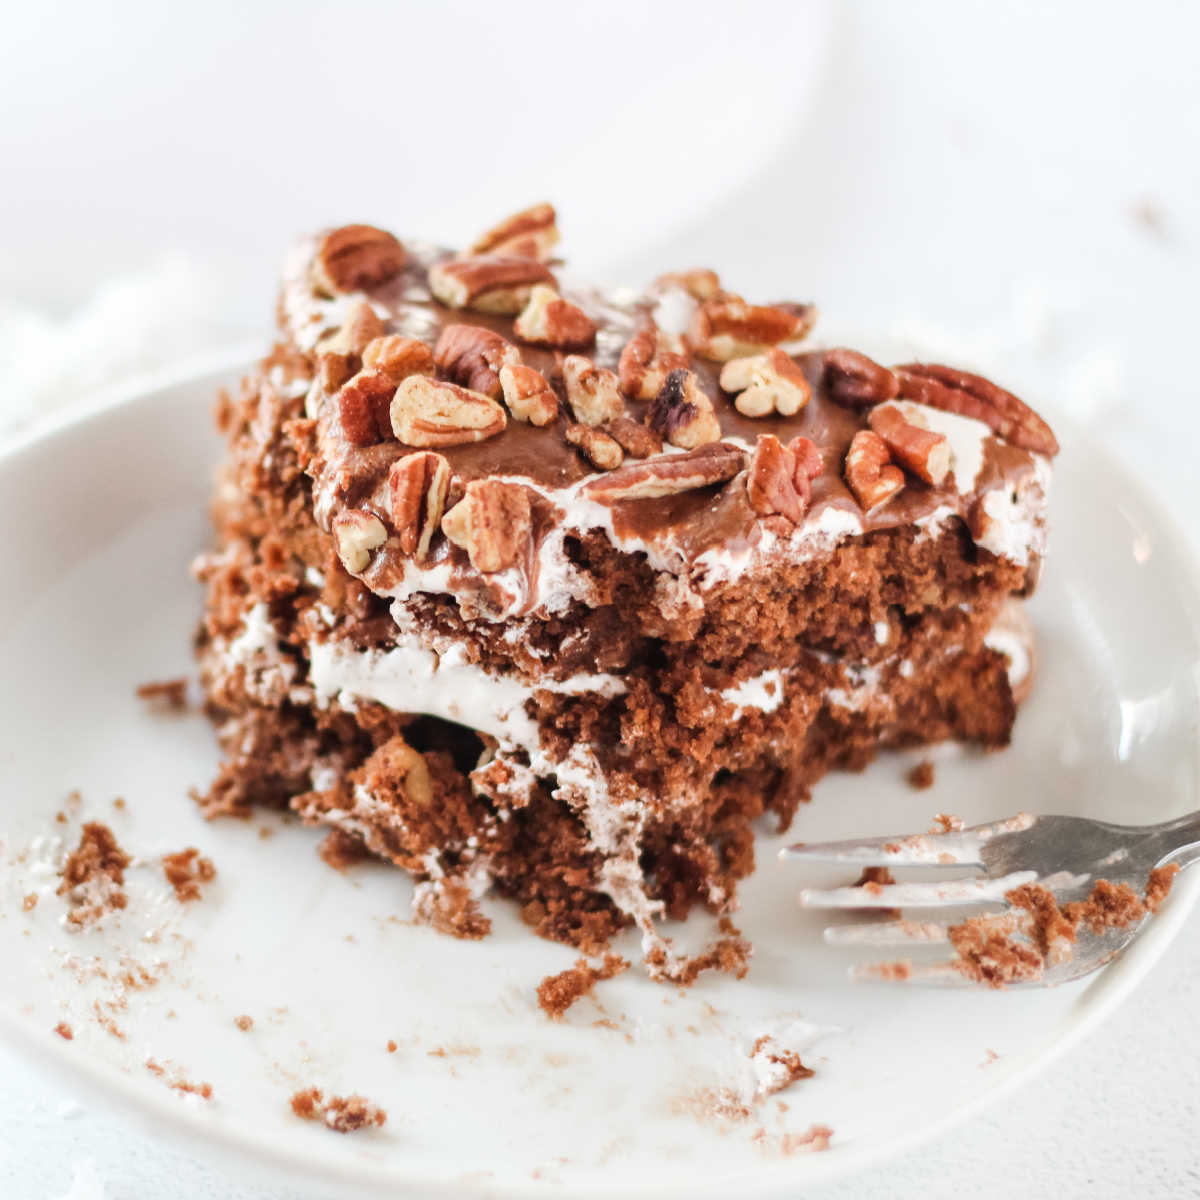 Bite out of mudslide cake with chocolate, marshmallow fluff, pecans and coconut.